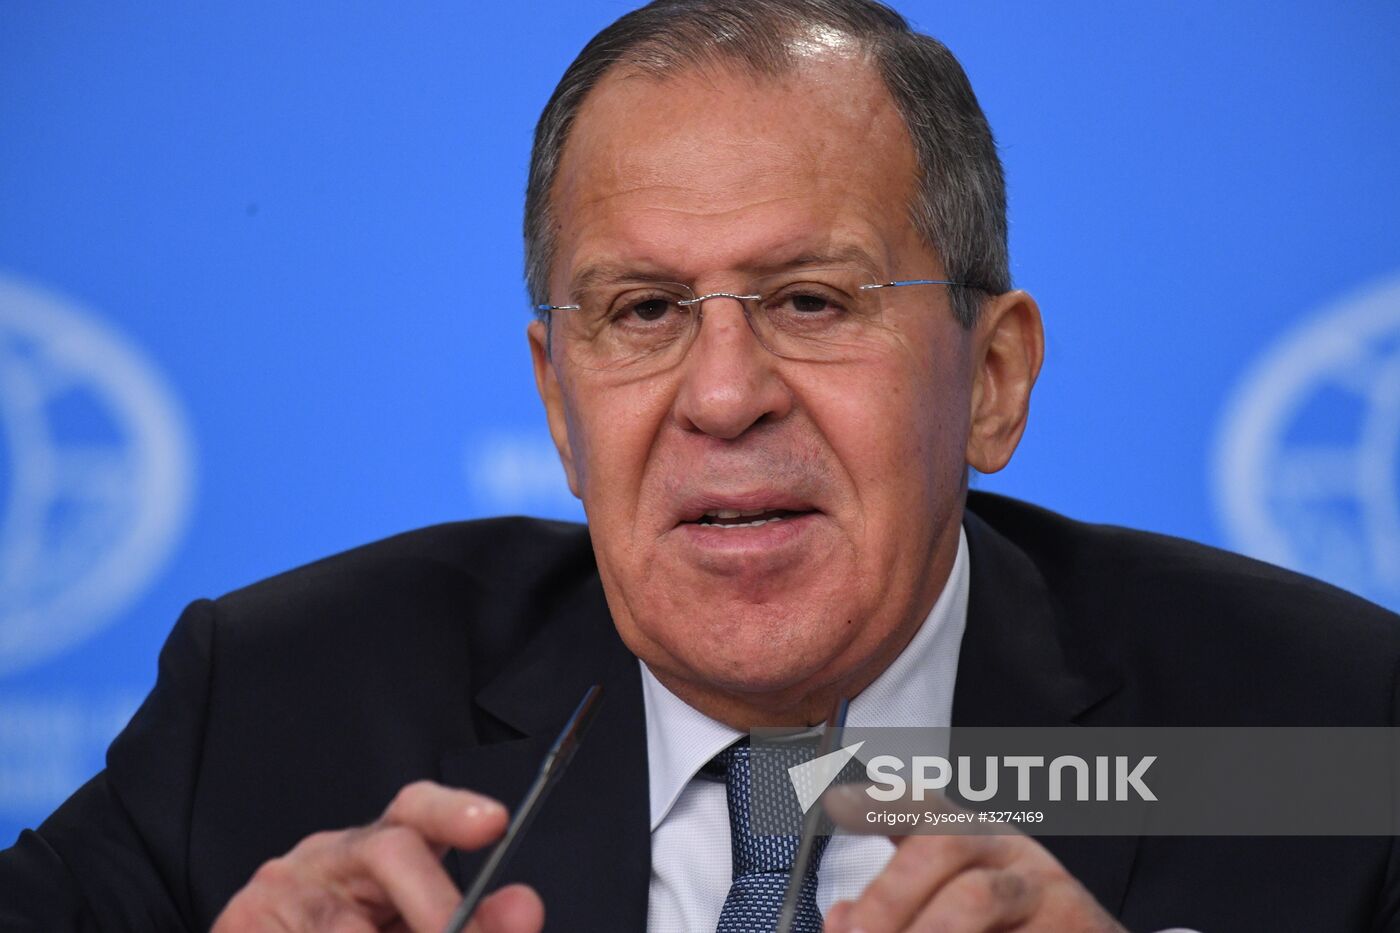 News conference with Russia's Foreign Minister Sergei Lavrov